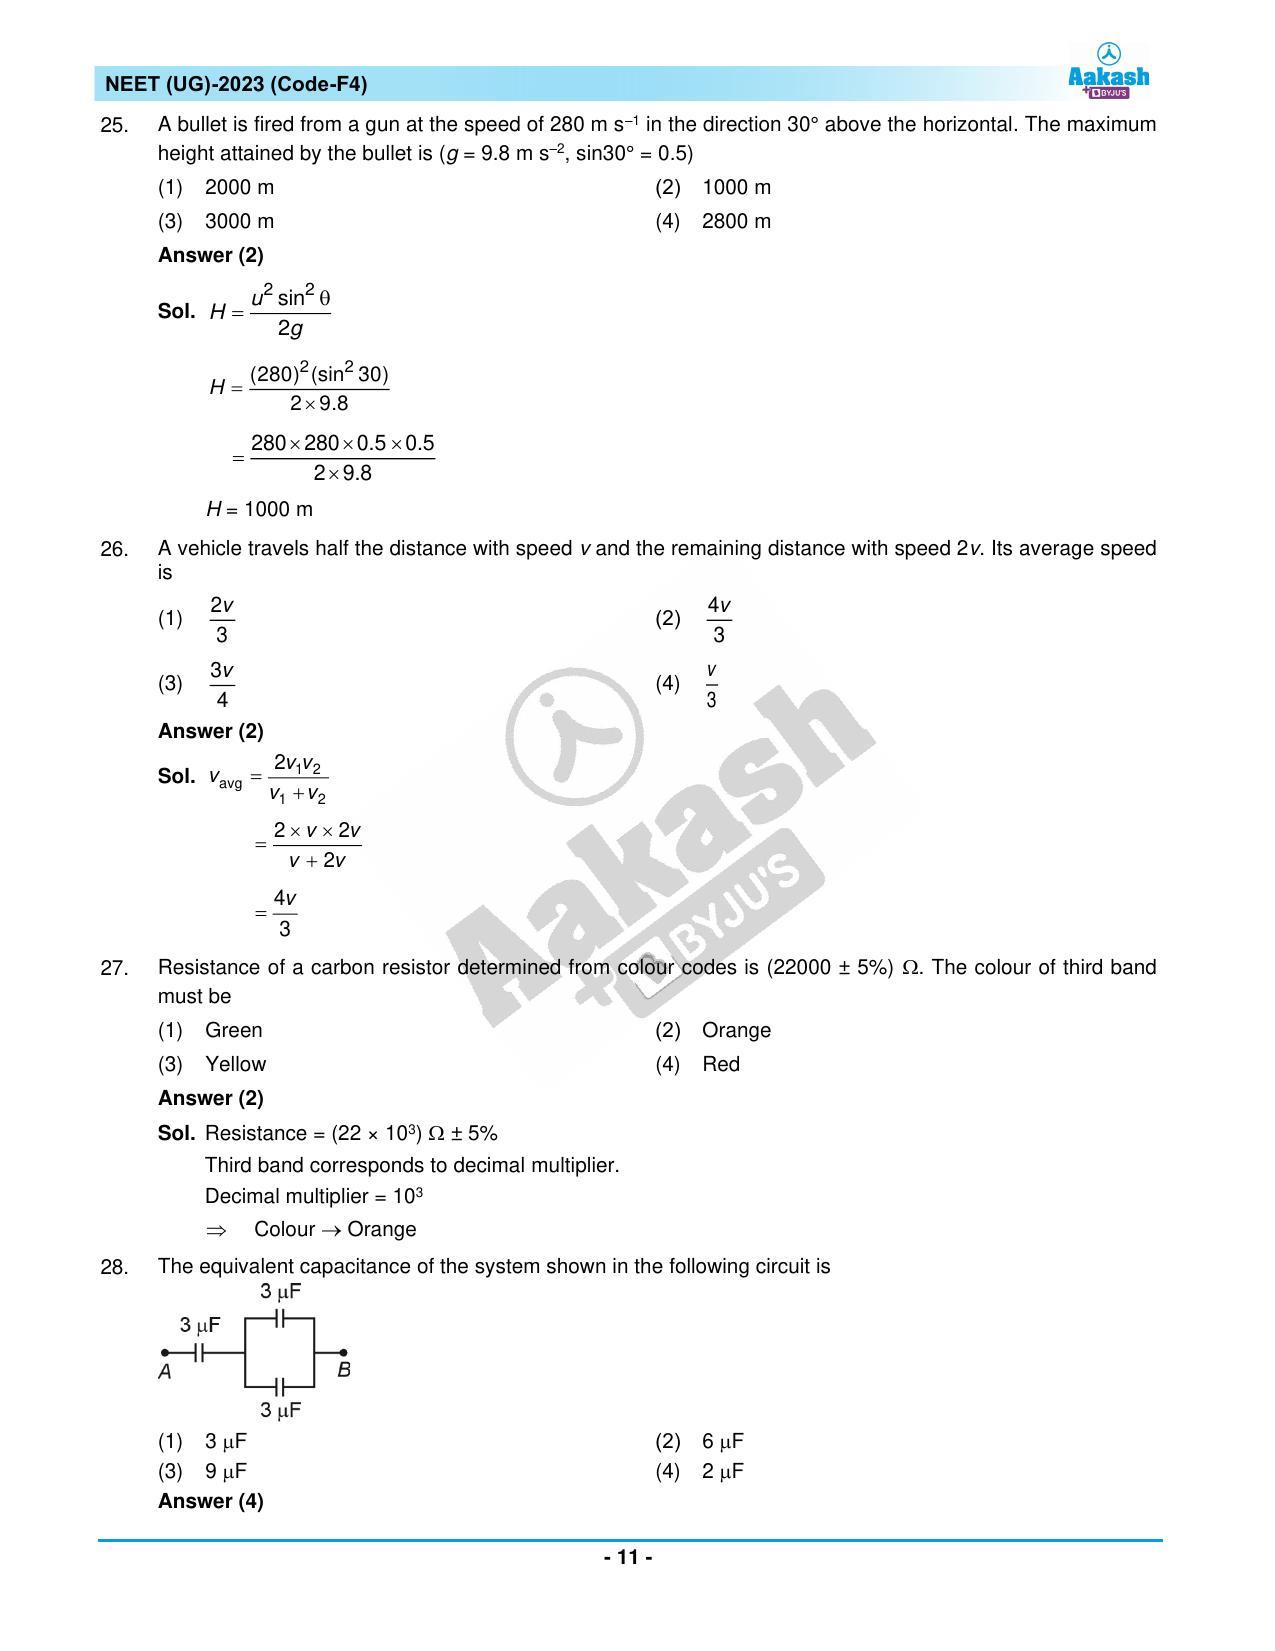 NEET 2023 Question Paper F4 - Page 11